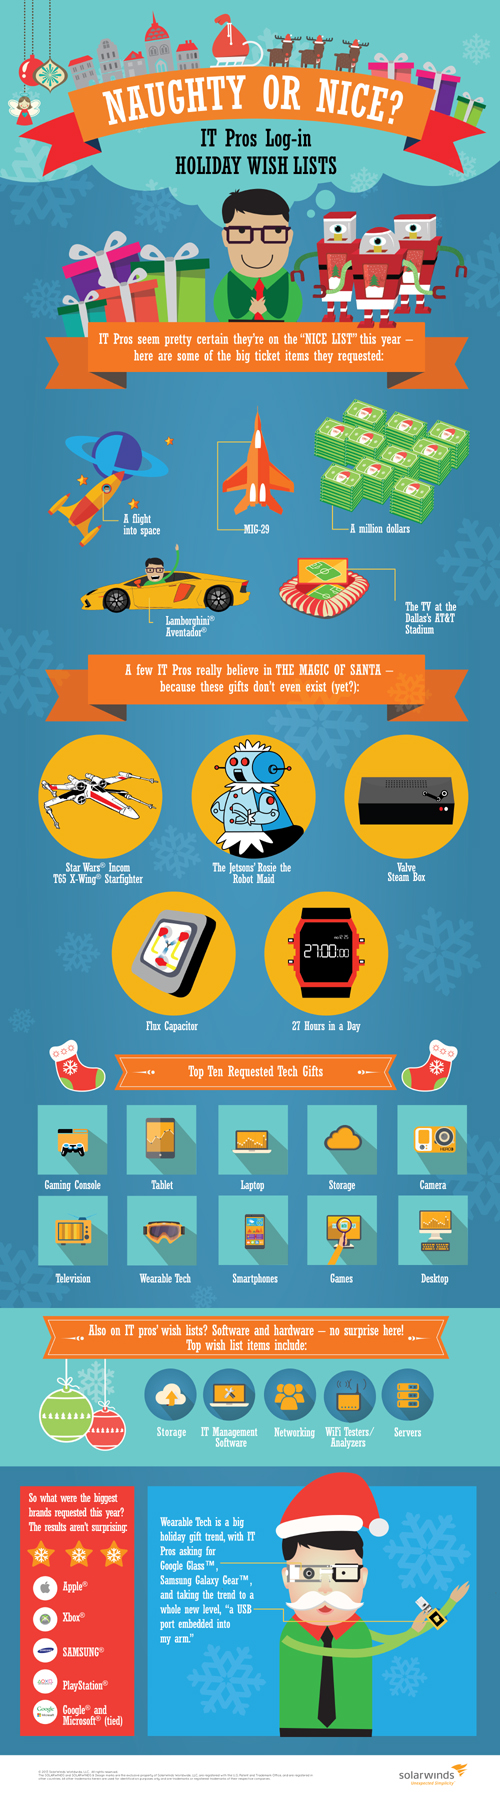 Solarwinds Dear Santa final Infographic: What IT Pros Want for Christmas This Year